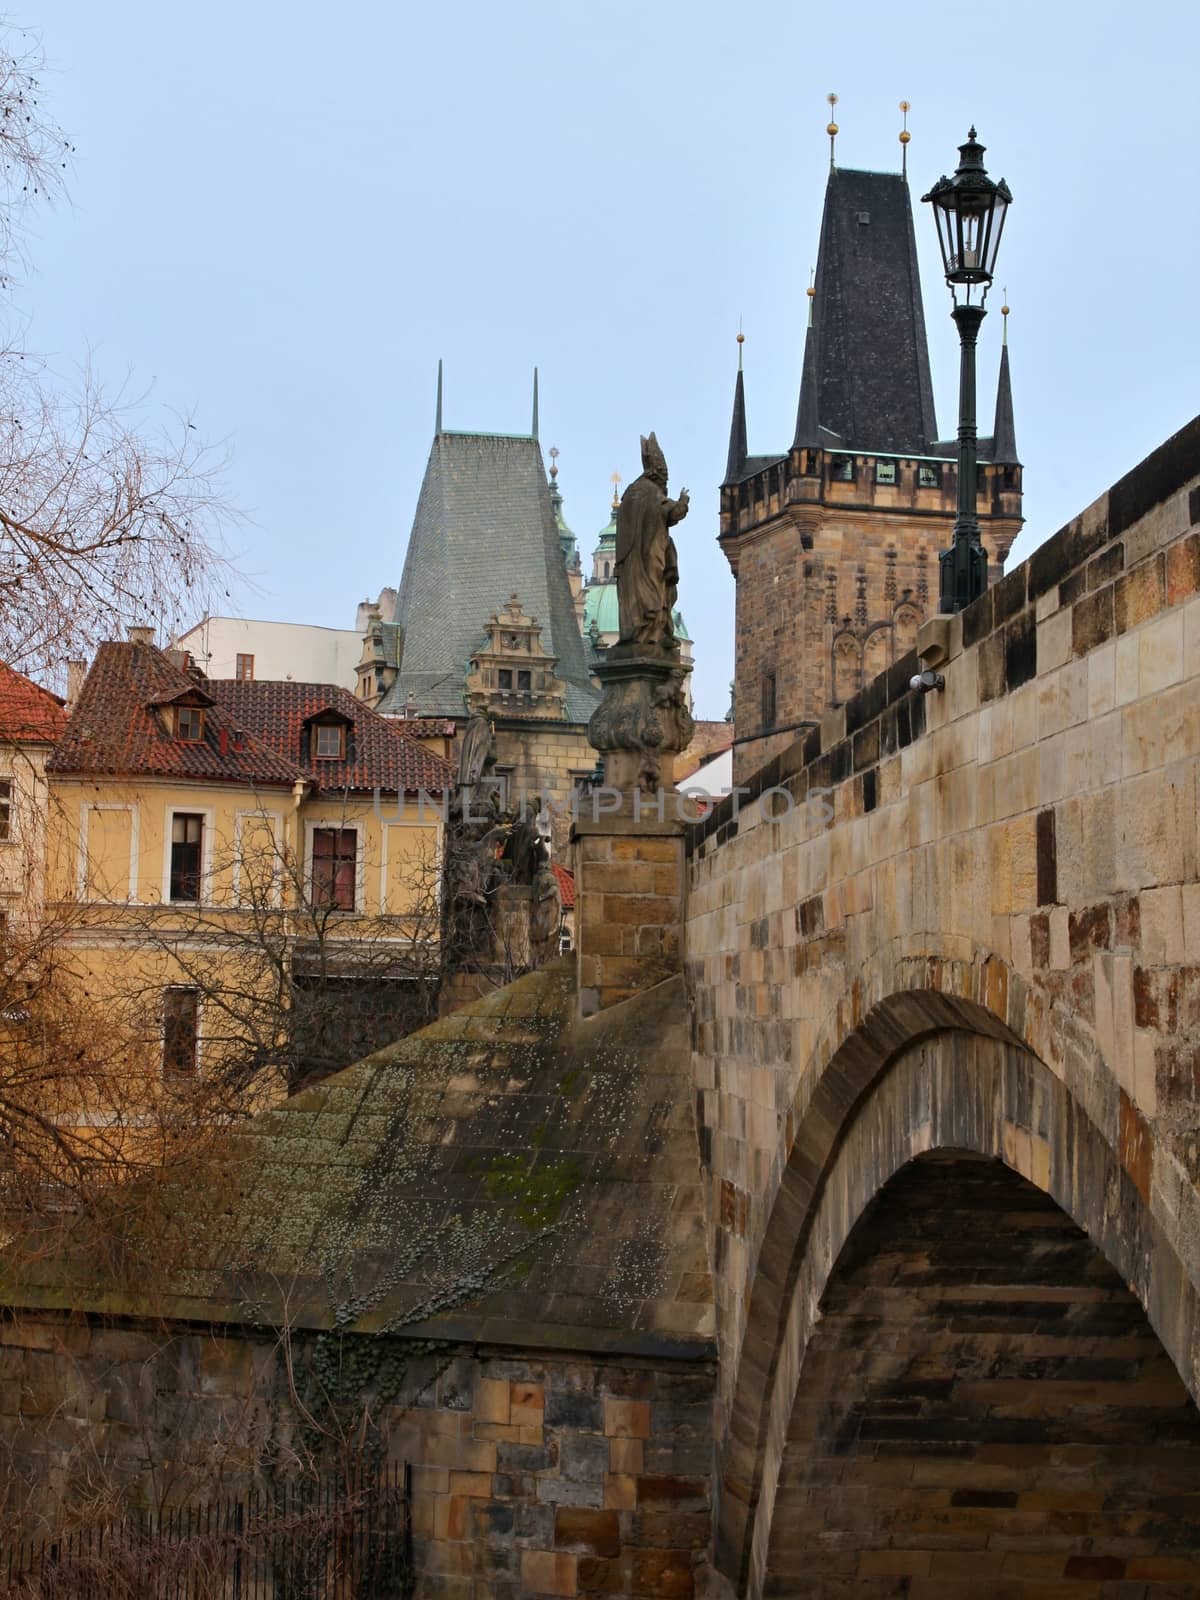 Photo of Charles bridge in Prague, Czech republic with the view onto old houses, towers and Vltava river.